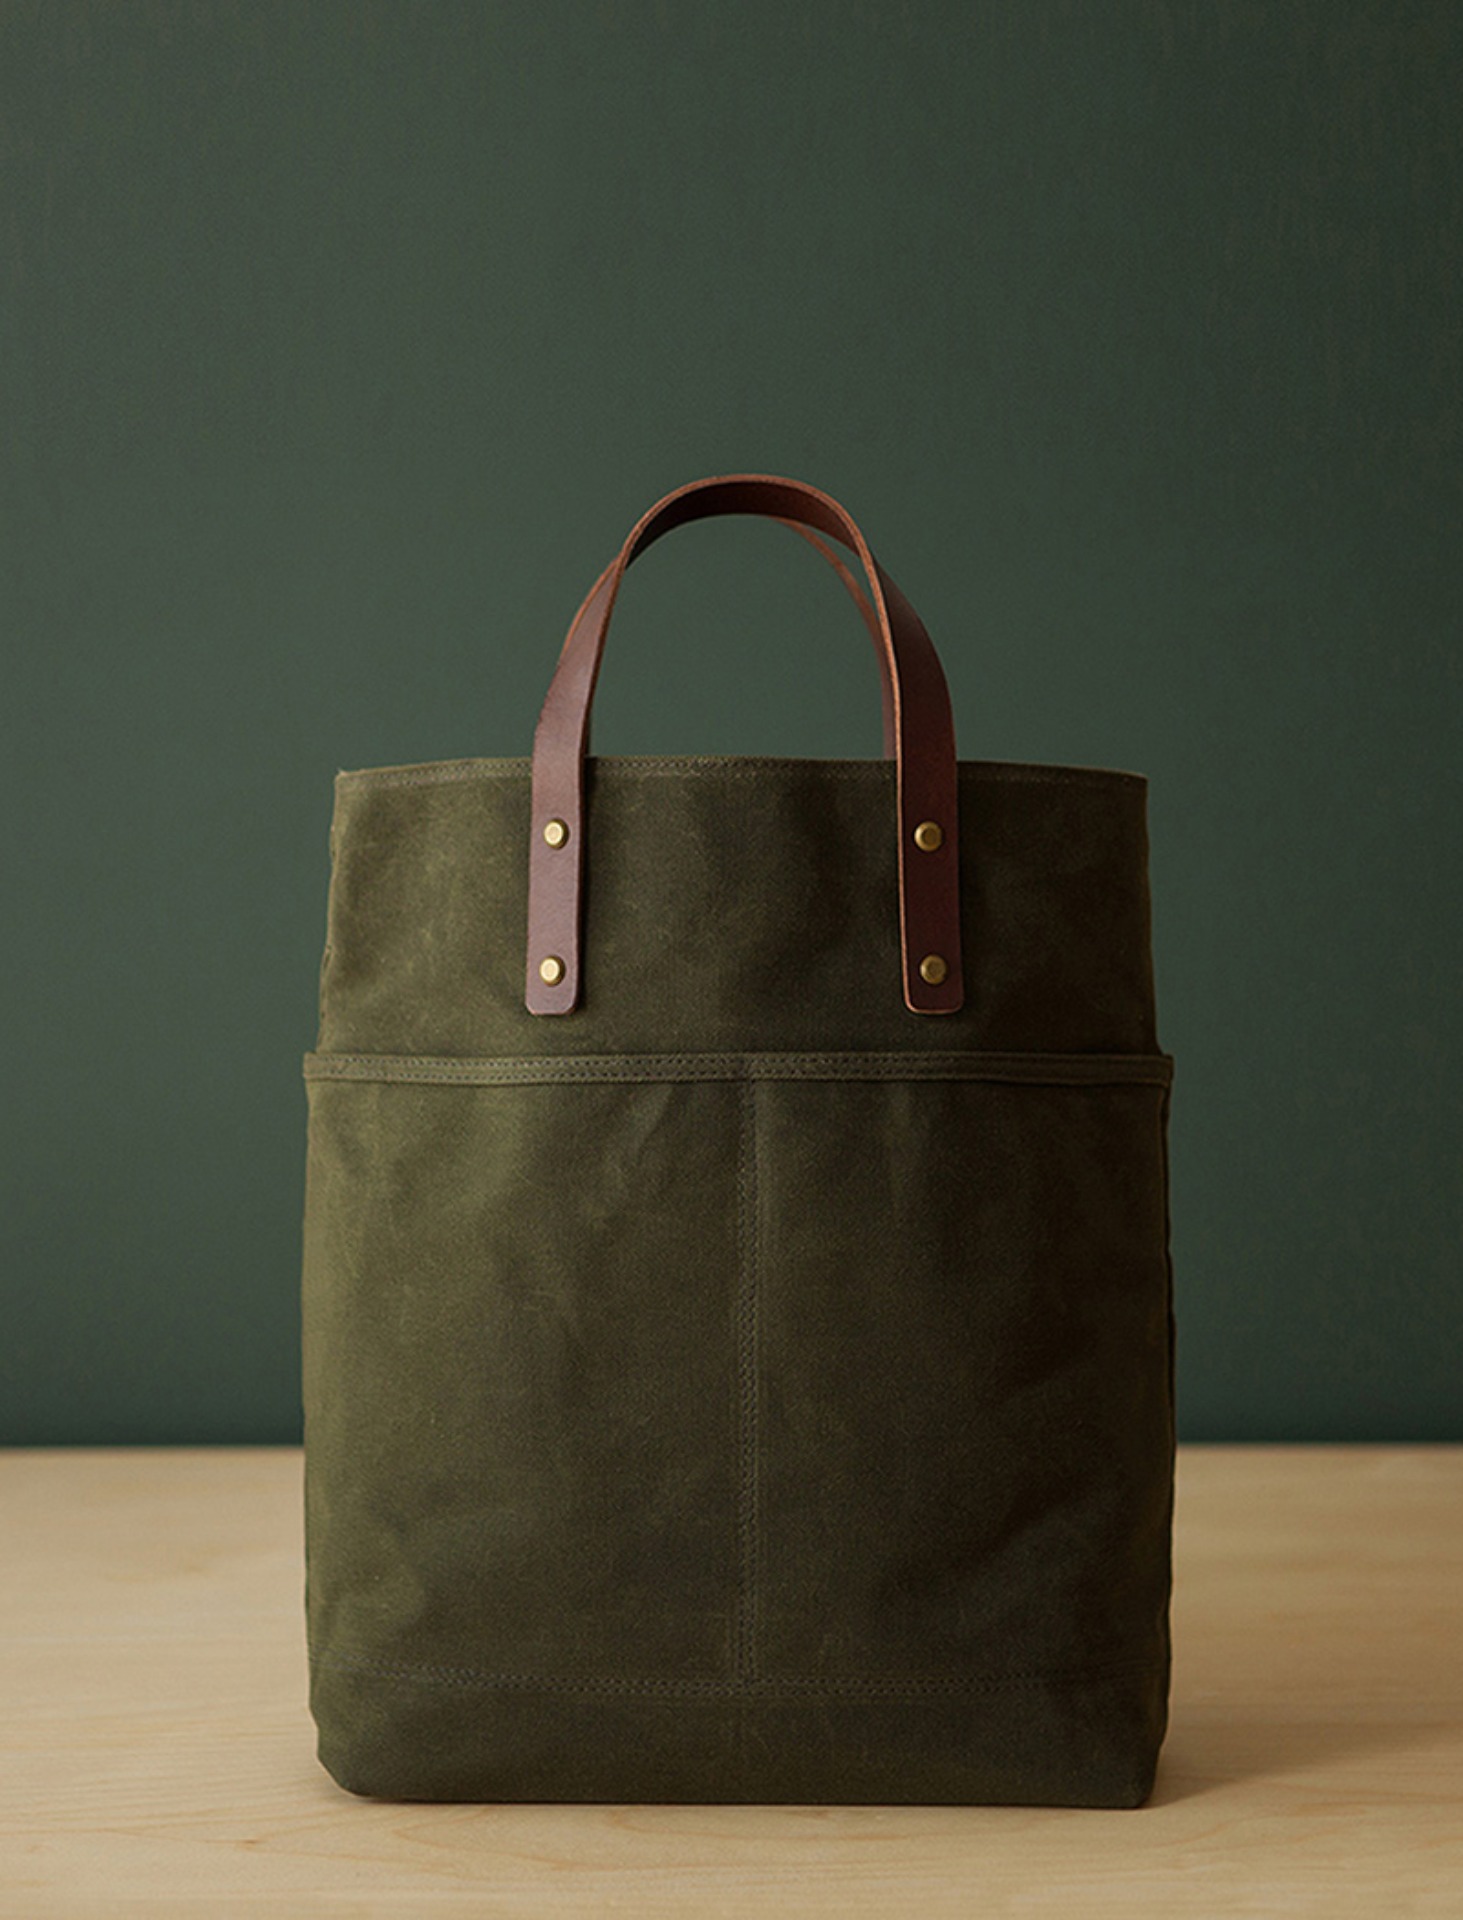 2 WAY TOTE WAXED CANVAS - OLIVE GREEN